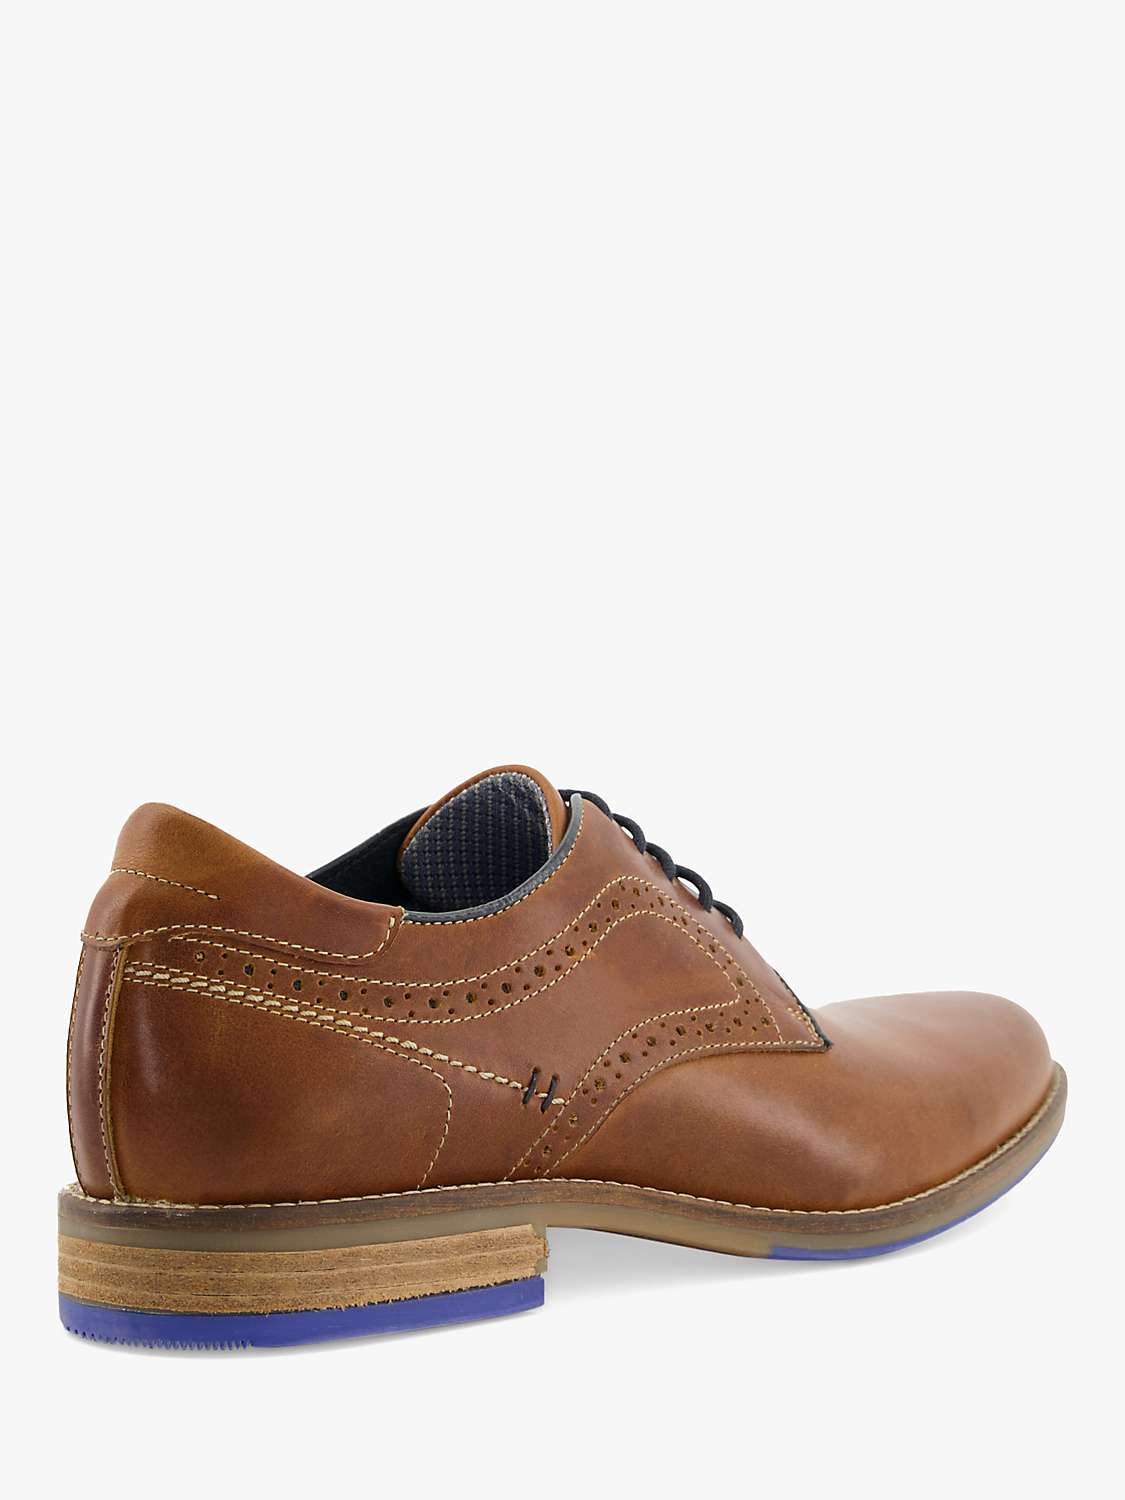 Buy Dune Wide Fit Bintom Leather Stitch Detail Derby Shoes, Tan Online at johnlewis.com